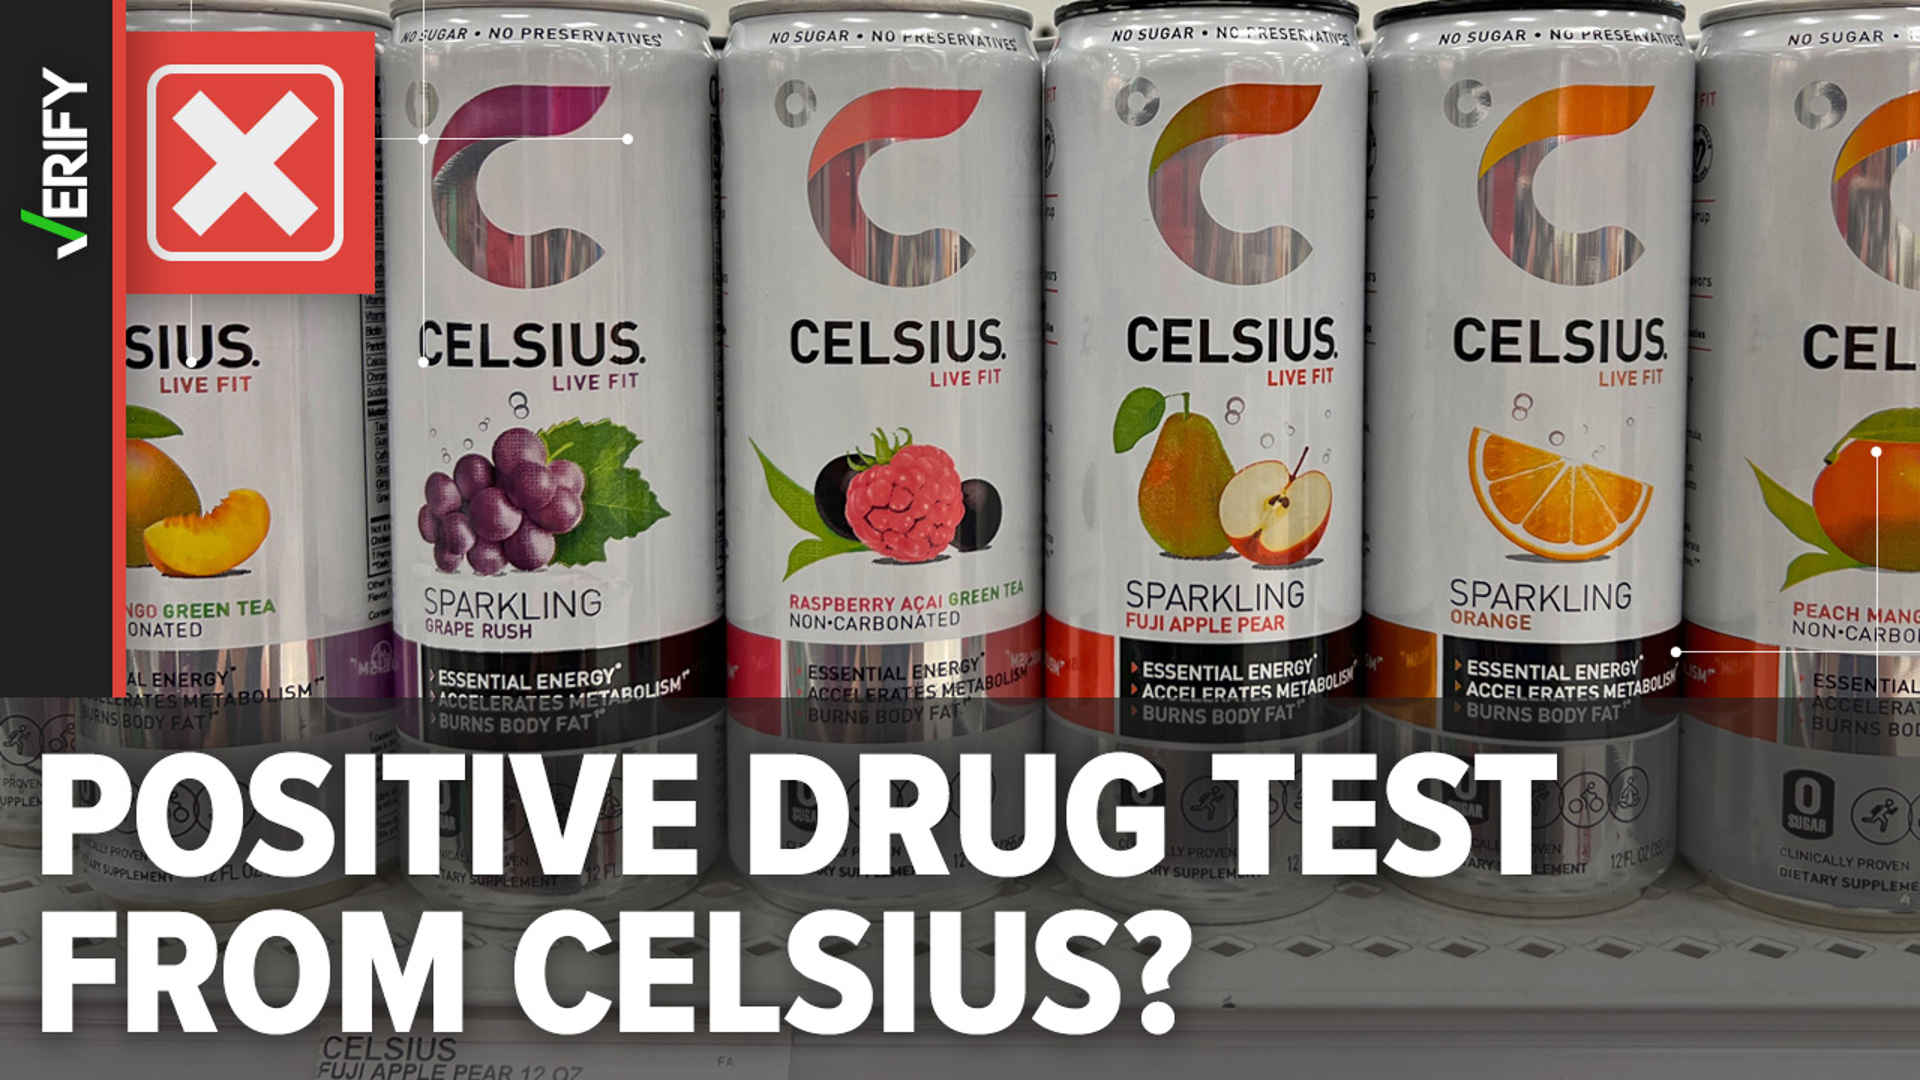 Viral posts claim the popular energy drink could cause a positive drug test result. We tested it for ourselves and can VERIFY those claims are false.